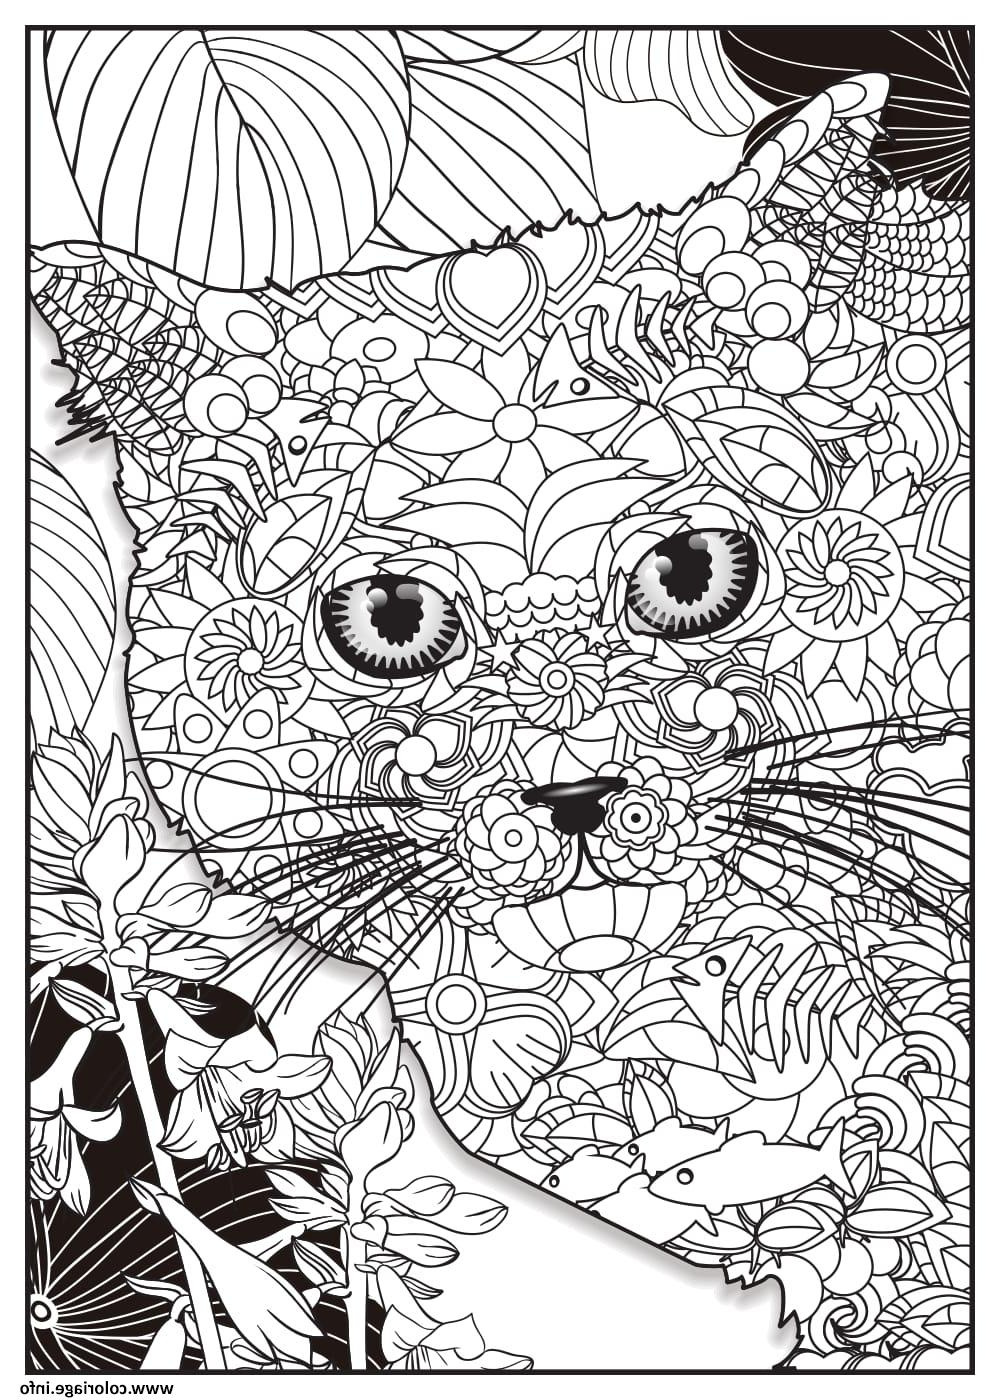 chat british shorthair adulte animaux coloriage